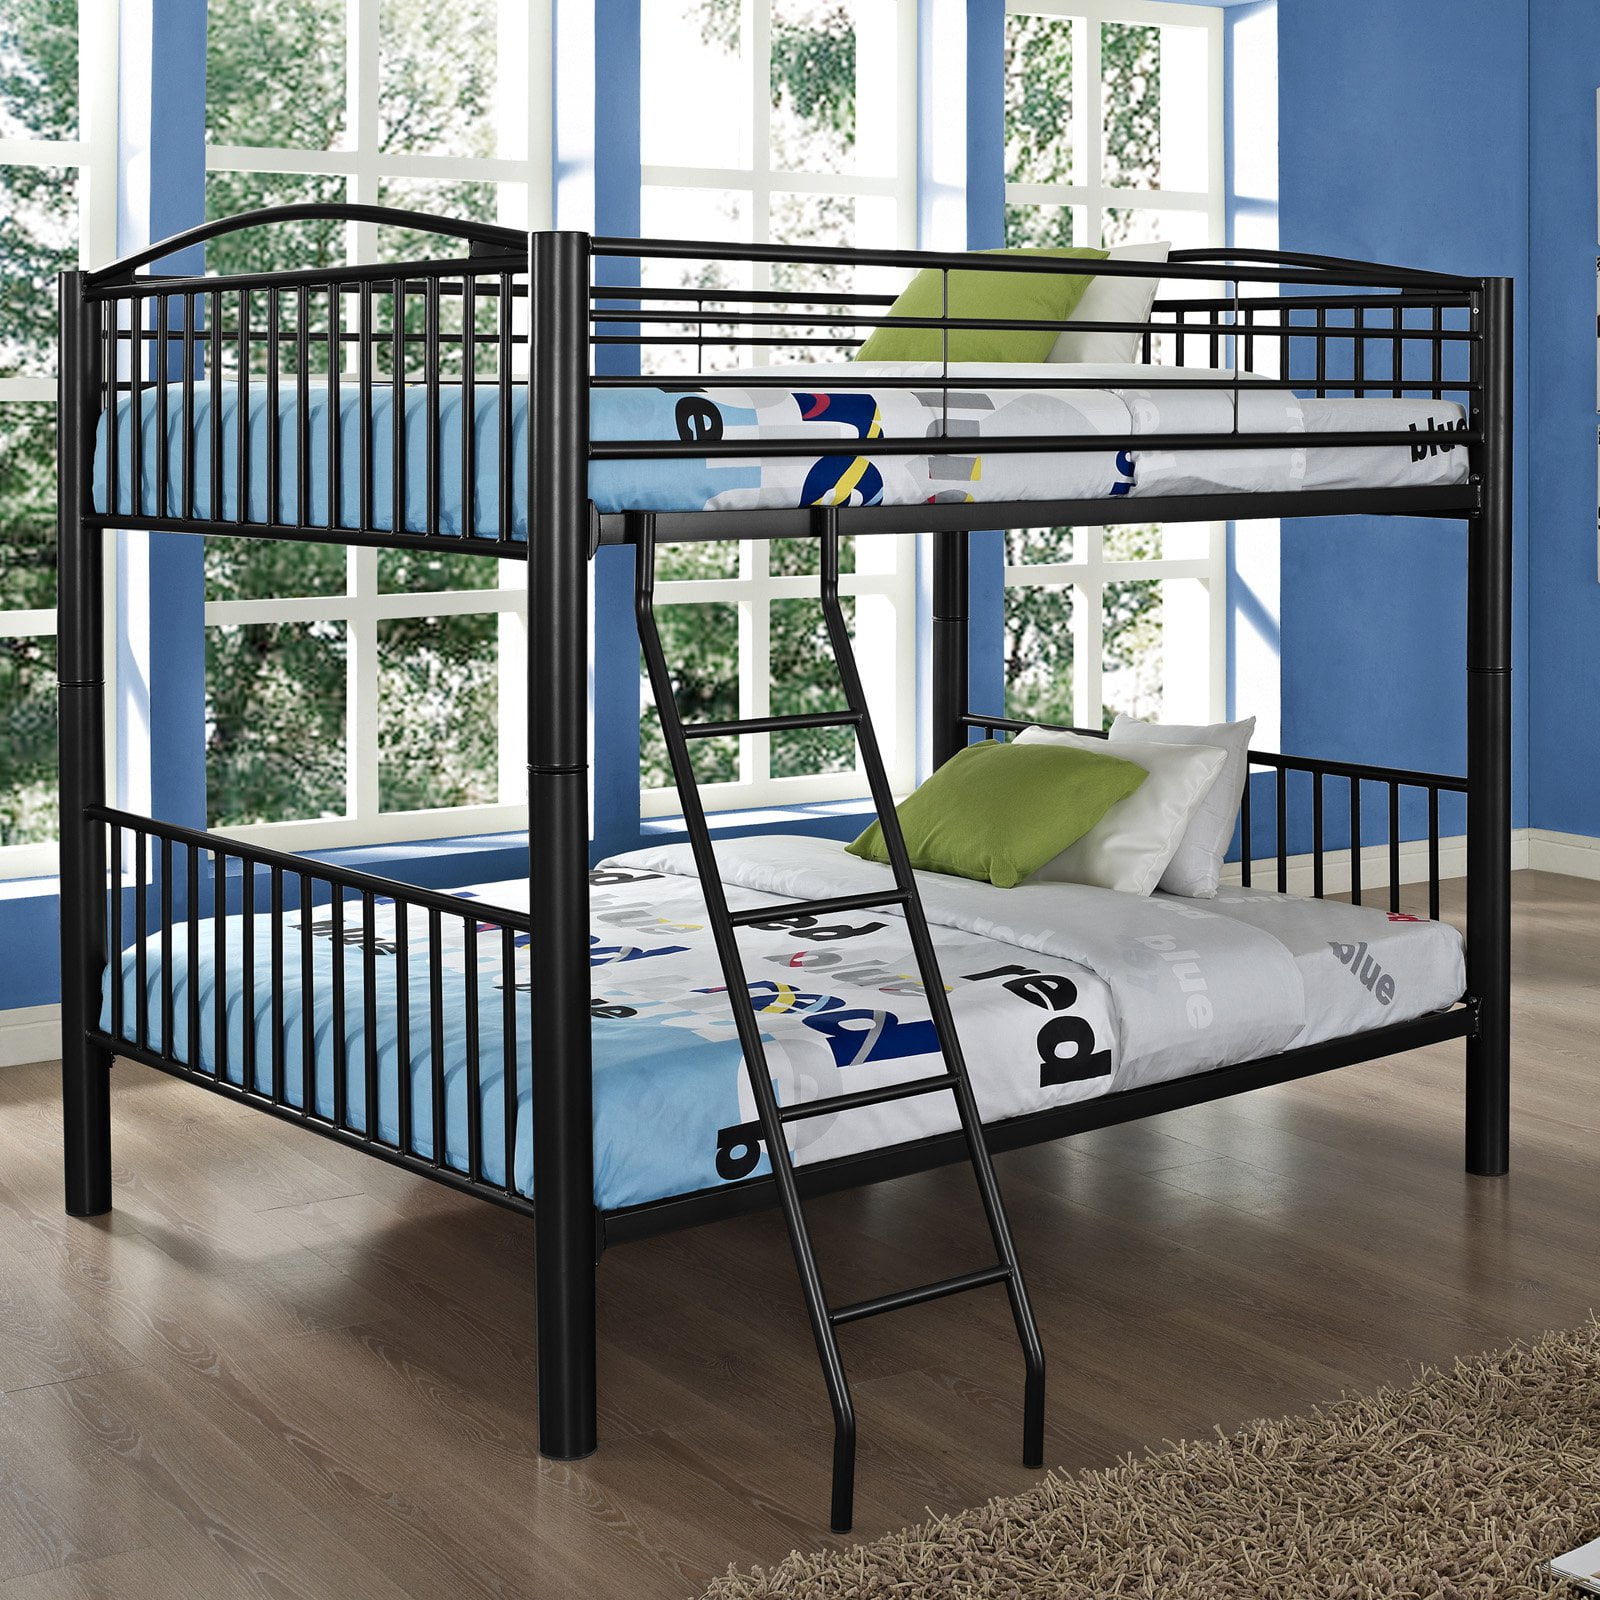 Bunk Beds With Mattresses Bundles, Bunk Beds With Mattresses Included